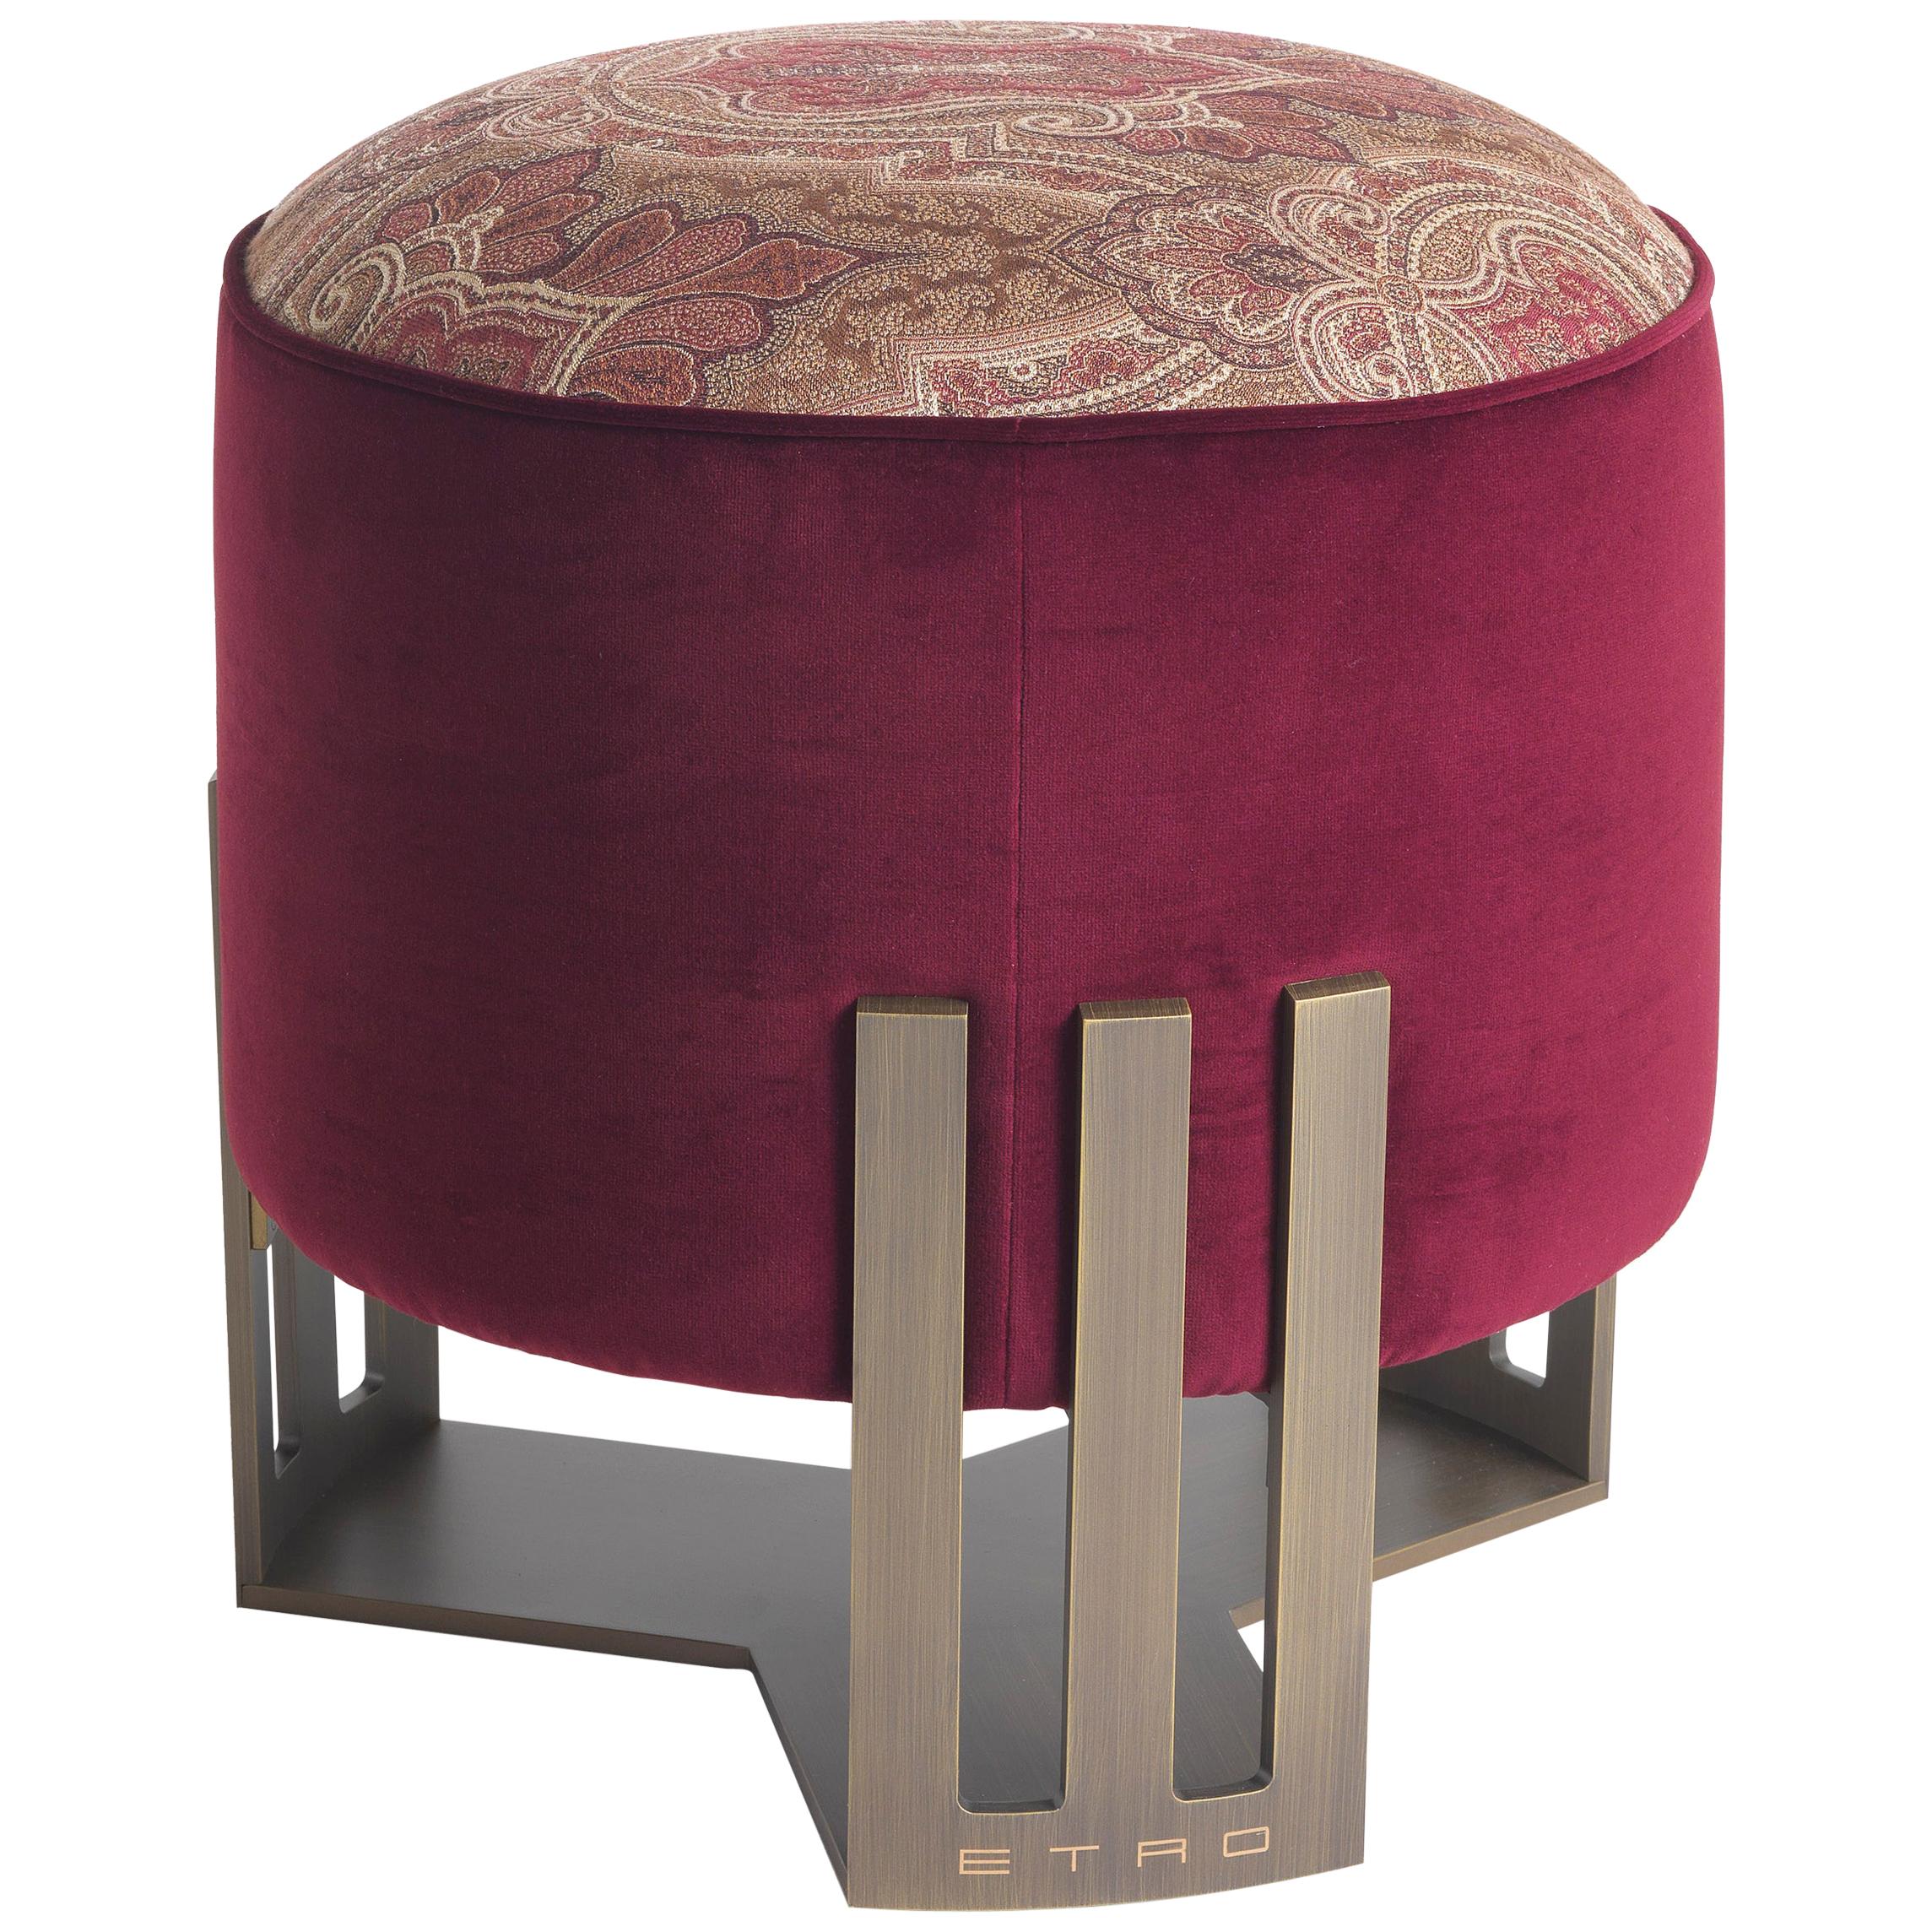 21st Century Klee Pouf in Paisley Print and Metal by Etro Home Interiors